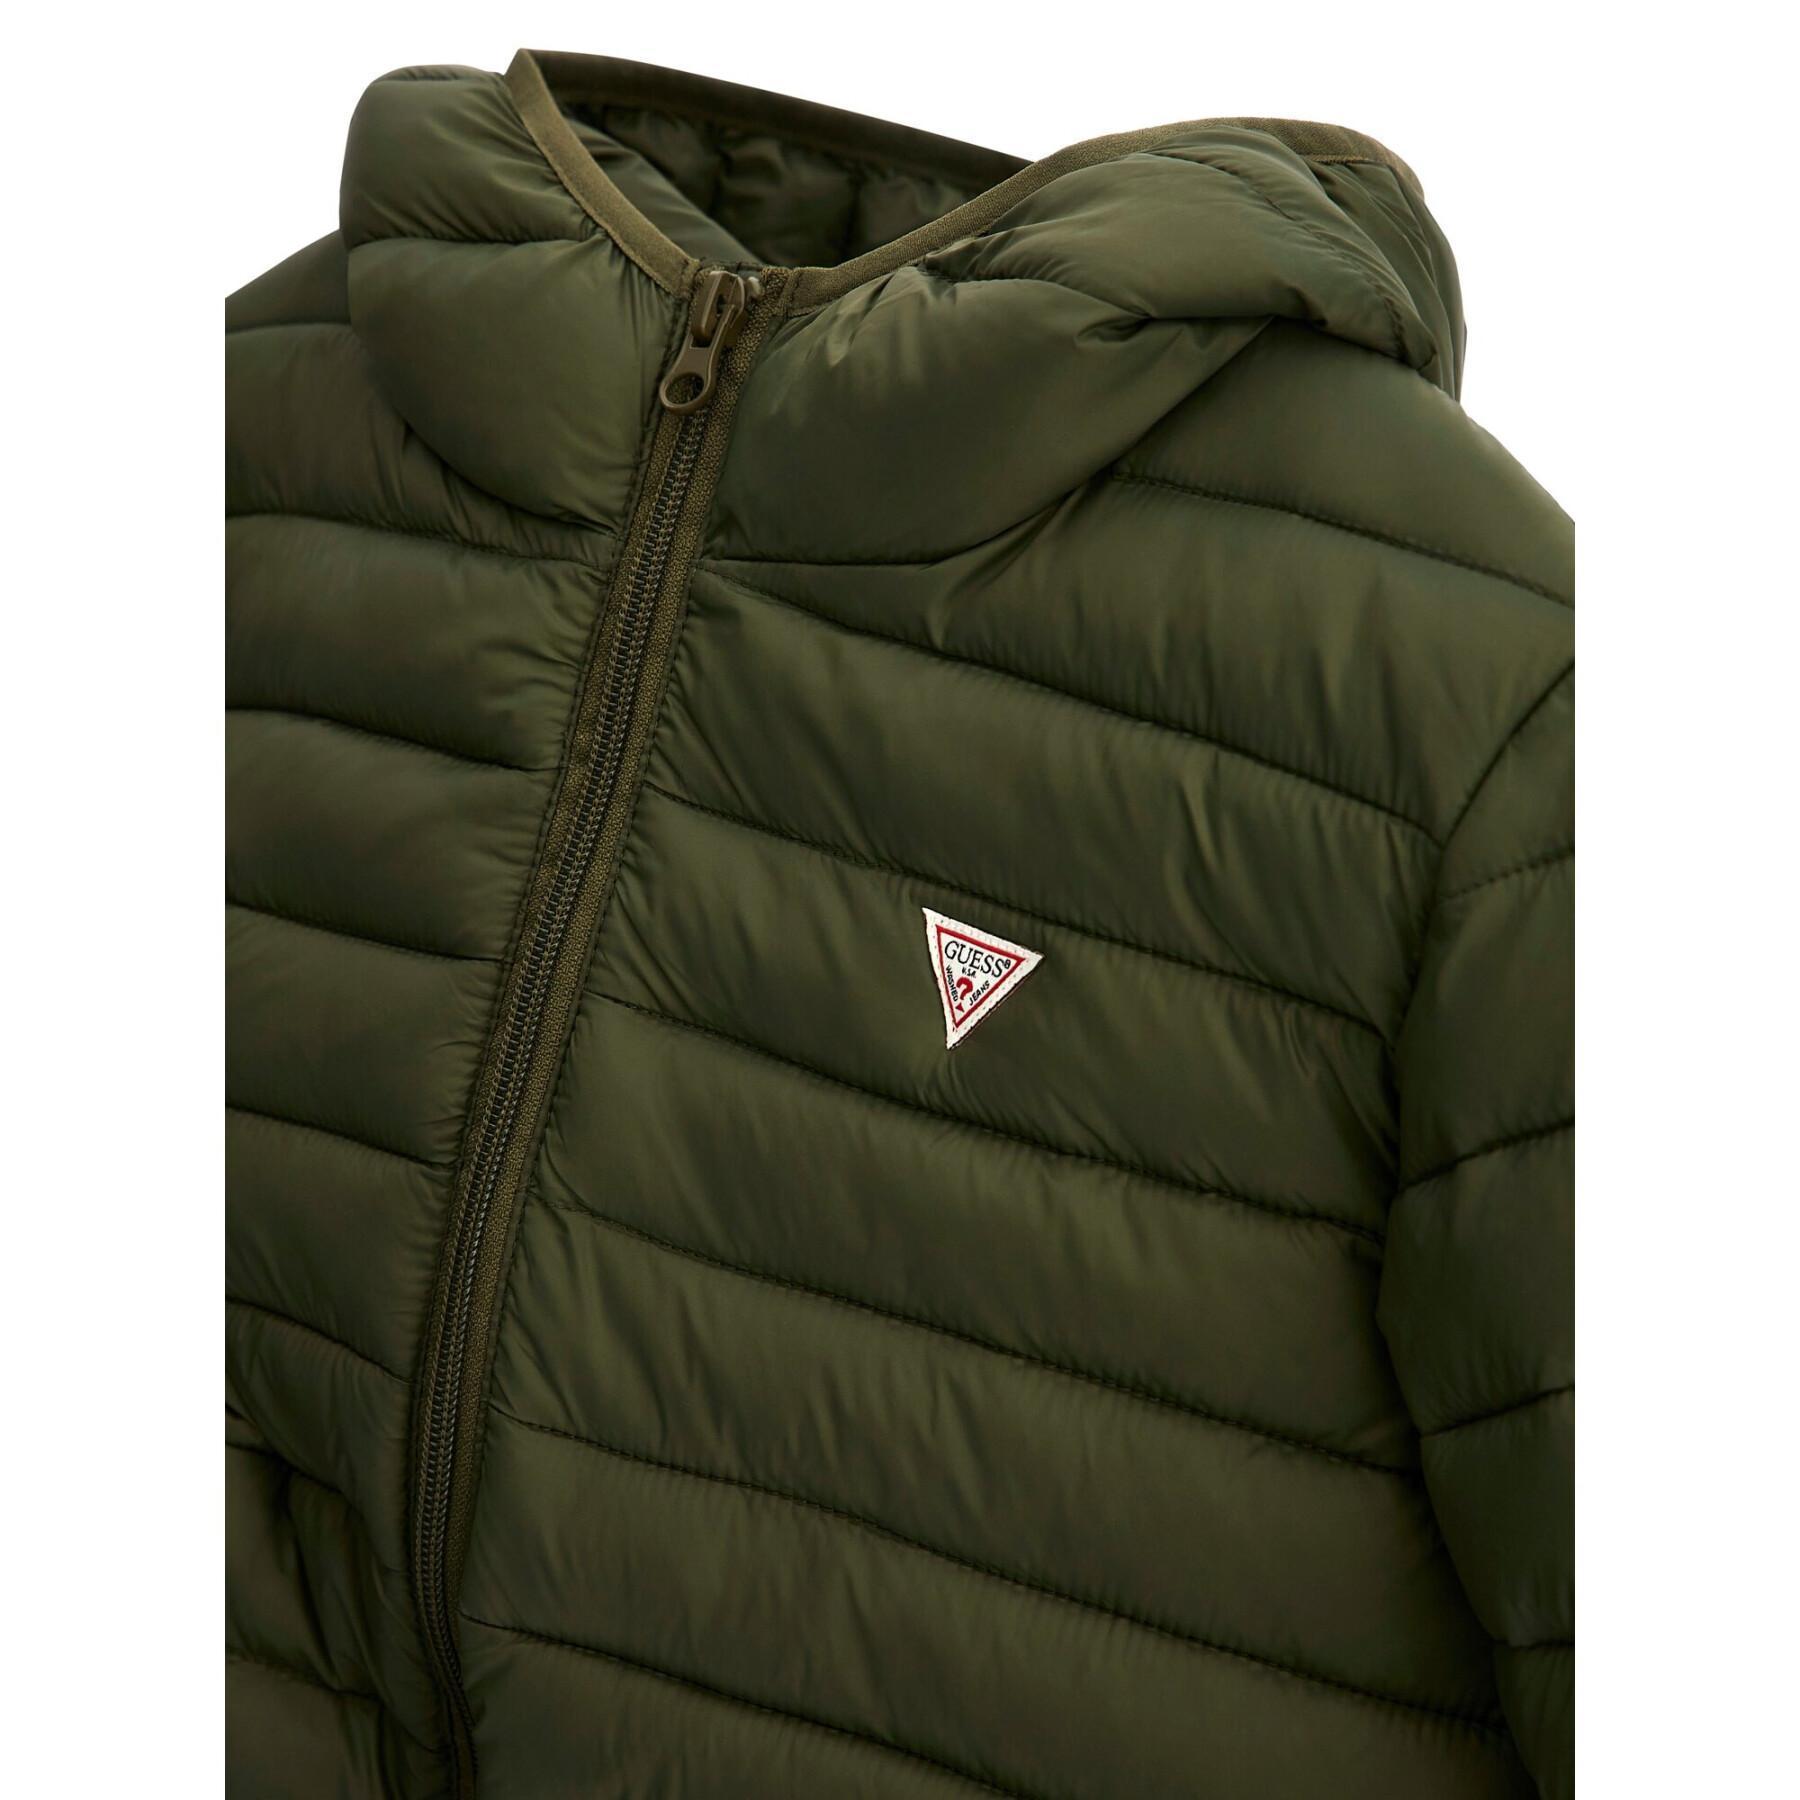 Kid's Puffer Jacket Guess Padded Core